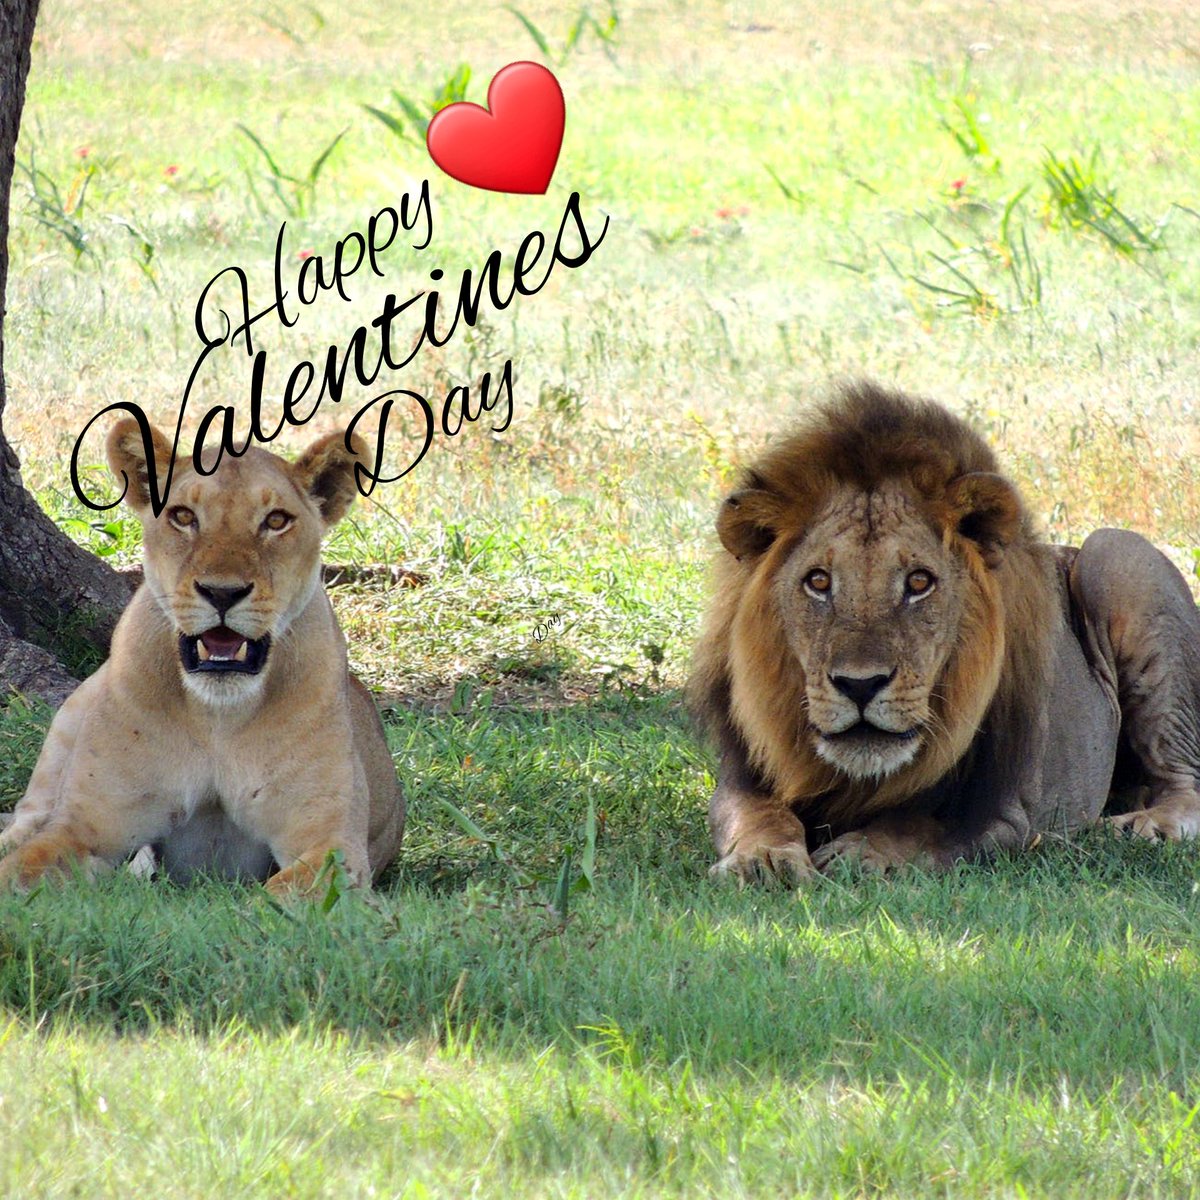 Happy Valentines day from all of us at Karibu Africa Safaris.

#HappyValentinesDay #ValentinesDay